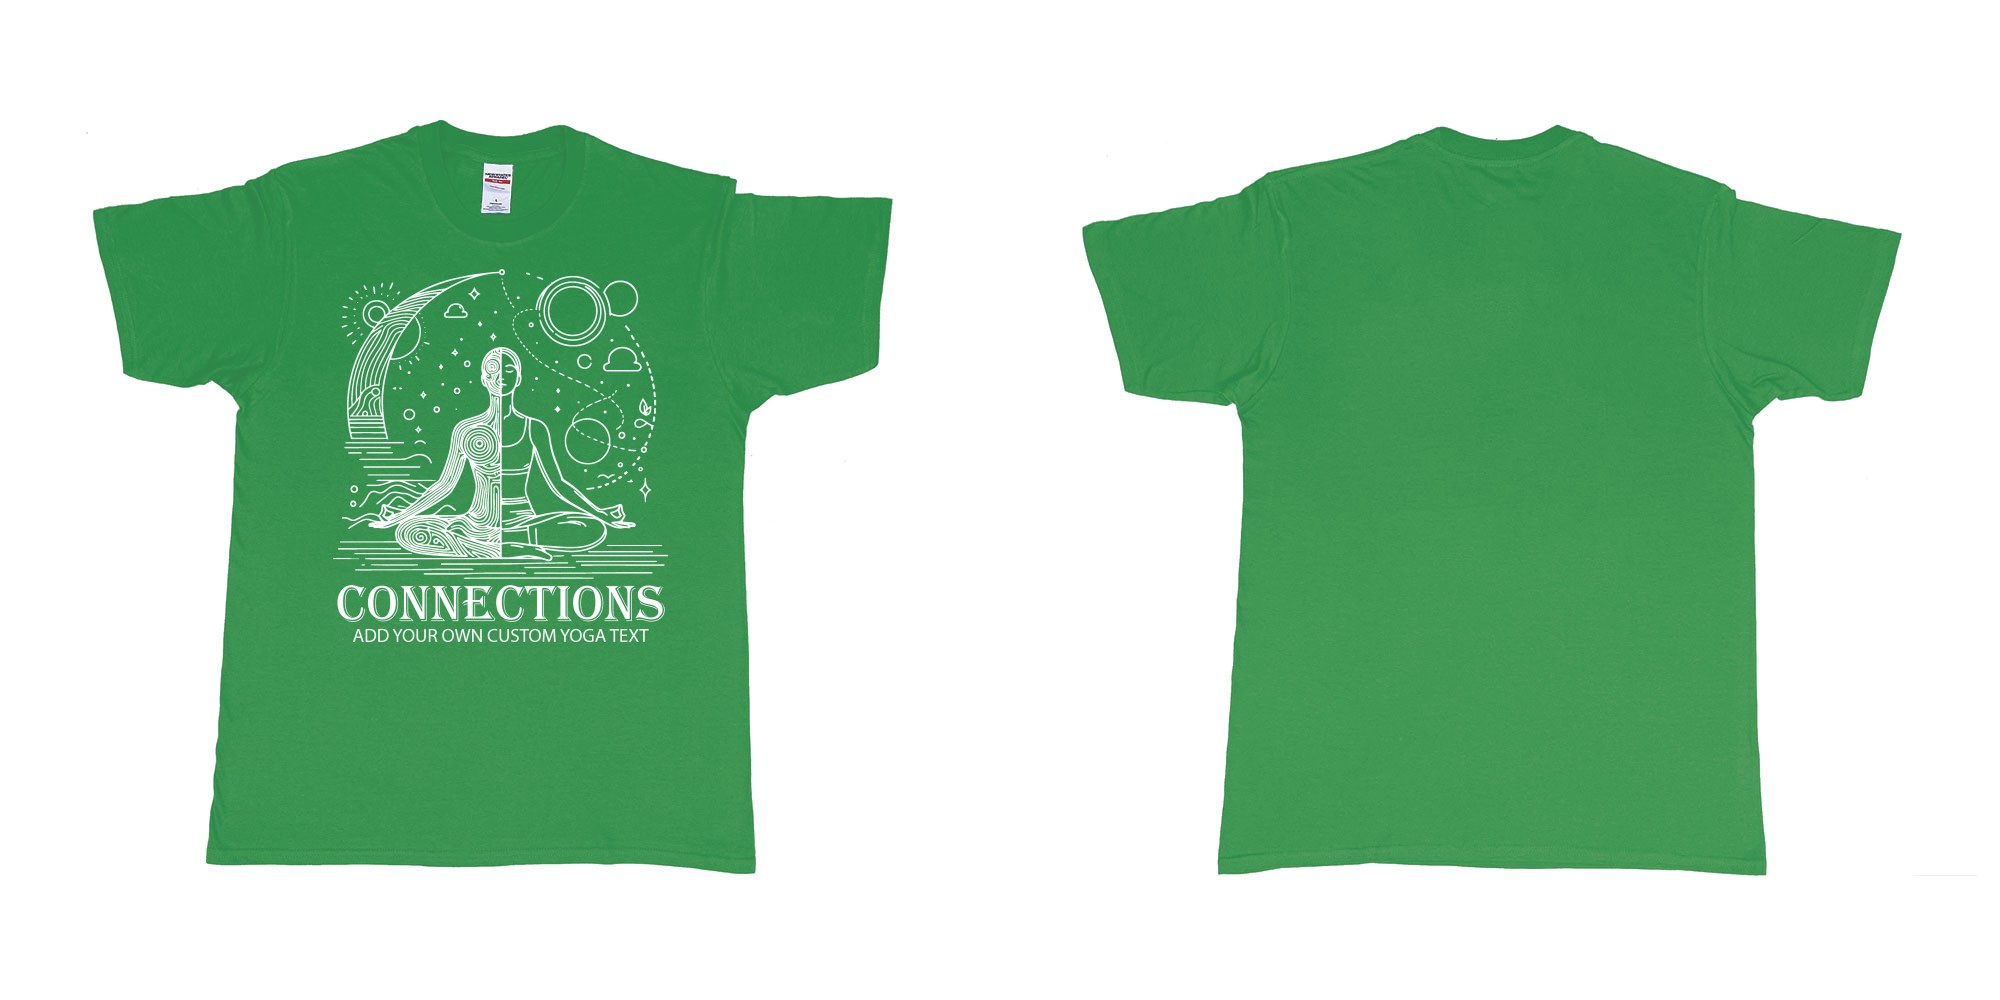 Custom tshirt design yogo connections human moon stars custom bali tshirt printing in fabric color irish-green choice your own text made in Bali by The Pirate Way